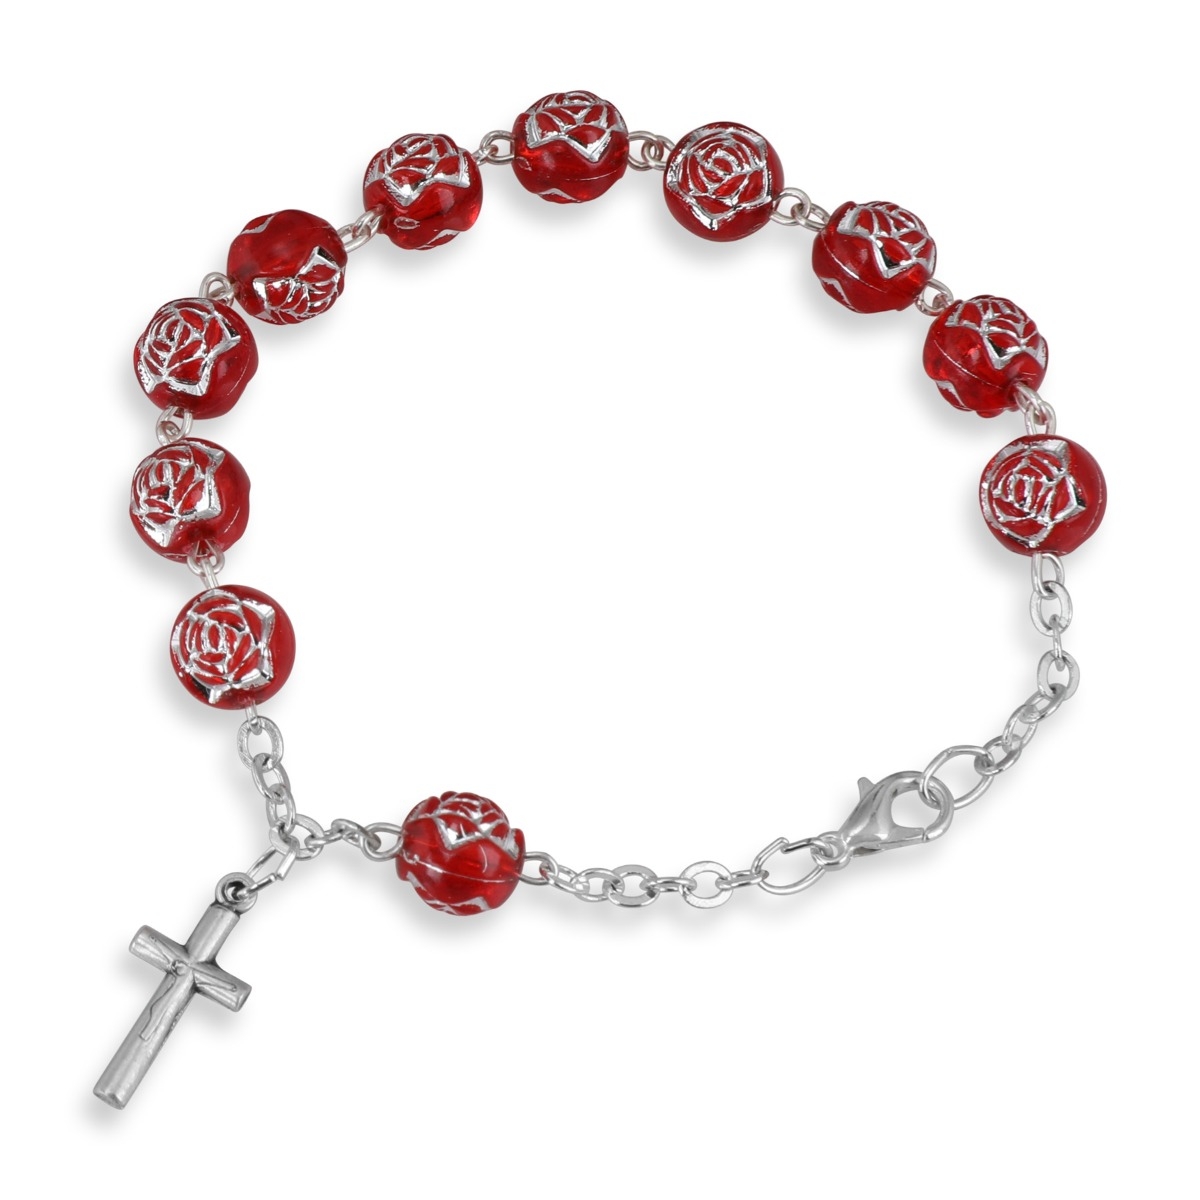 Holyland Rosary Rosary Bracelet With Red Flower Beads and Crucifix - 1